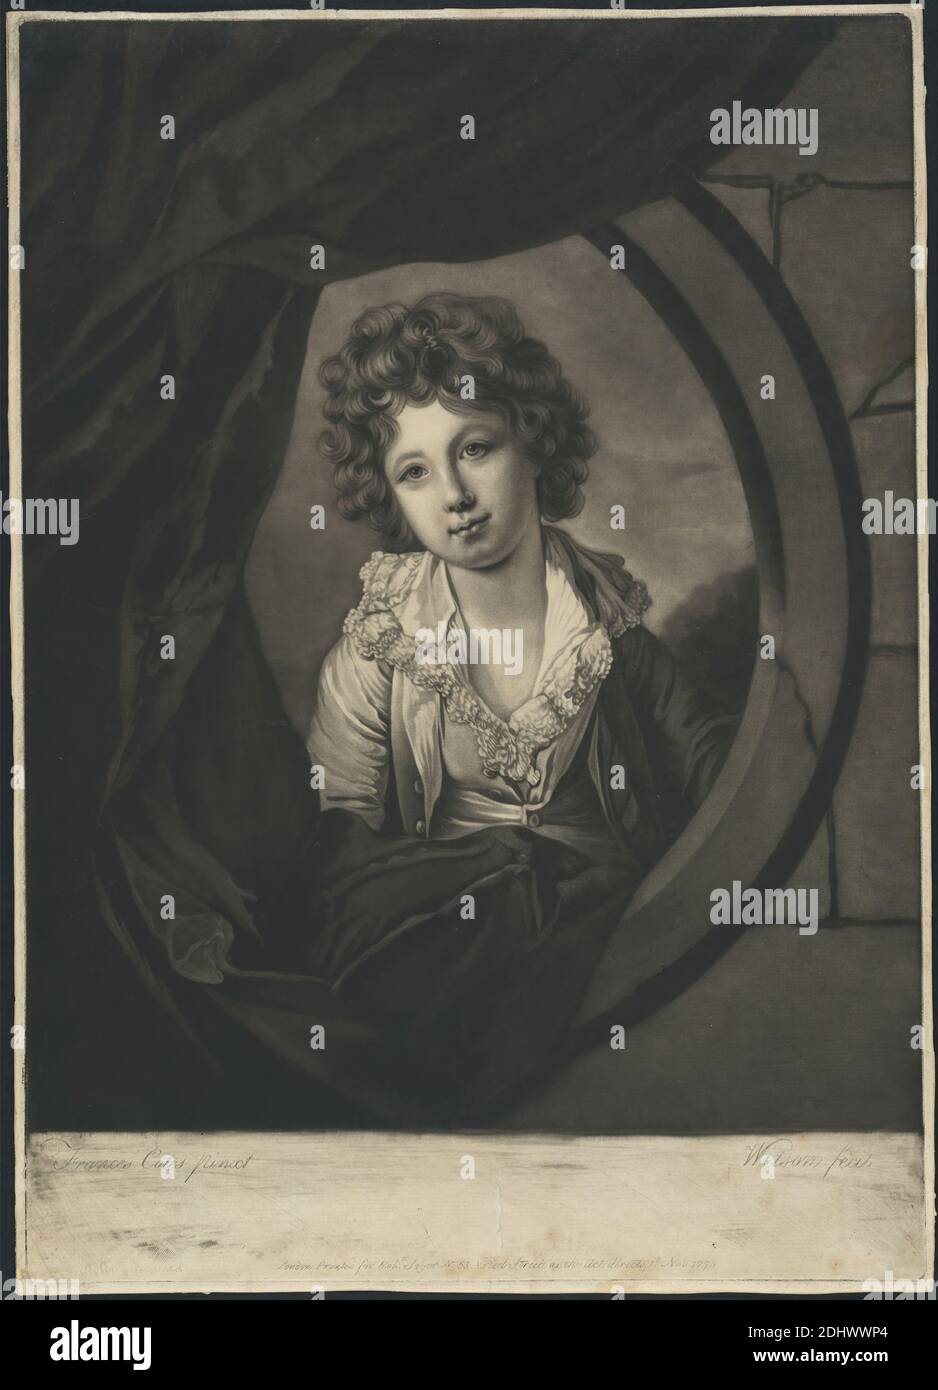 Master Skinner, Print made by James Wilson, c.1735–c.1786, after Francis Cotes RA, 1726–1770, British, 1770, Mezzotint on moderately thick, moderately textured, beige laid paper, Sheet: 14 1/8 × 10 1/16 inches (35.9 × 25.6 cm) and Image: 12 1/4 × 9 13/16 inches (31.1 × 24.9 cm Stock Photo